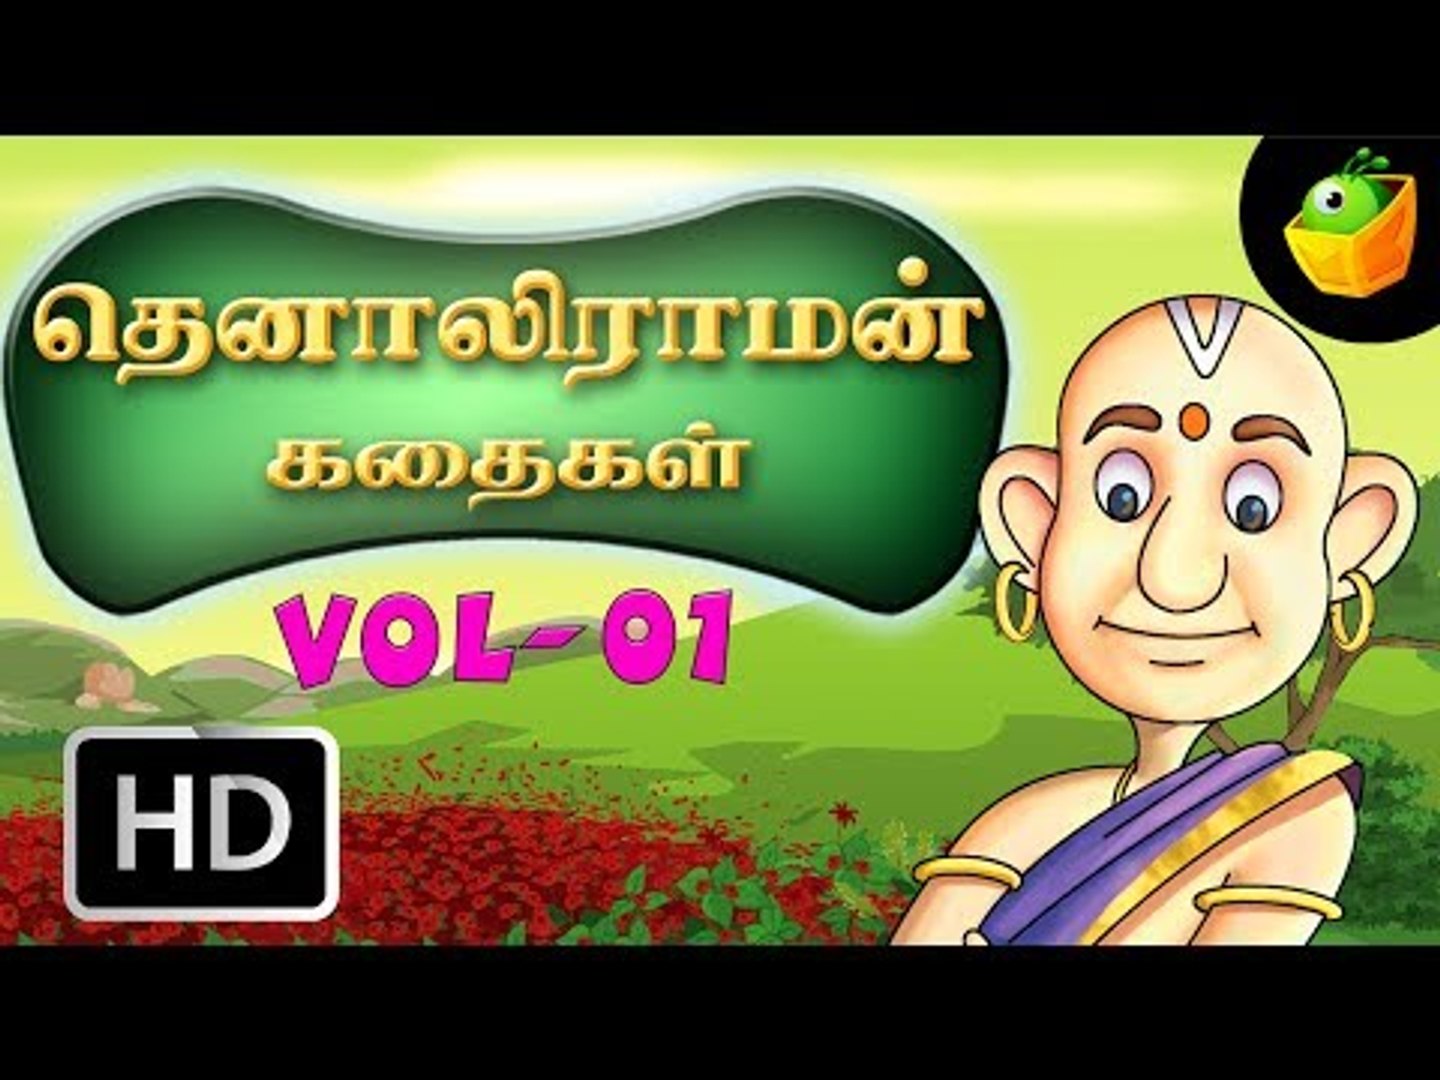 Tenali Raman Full Stories Vol 1 In Tamil (HD) - Compilation of Cartoon/ Animated Stories For Kids - video Dailymotion